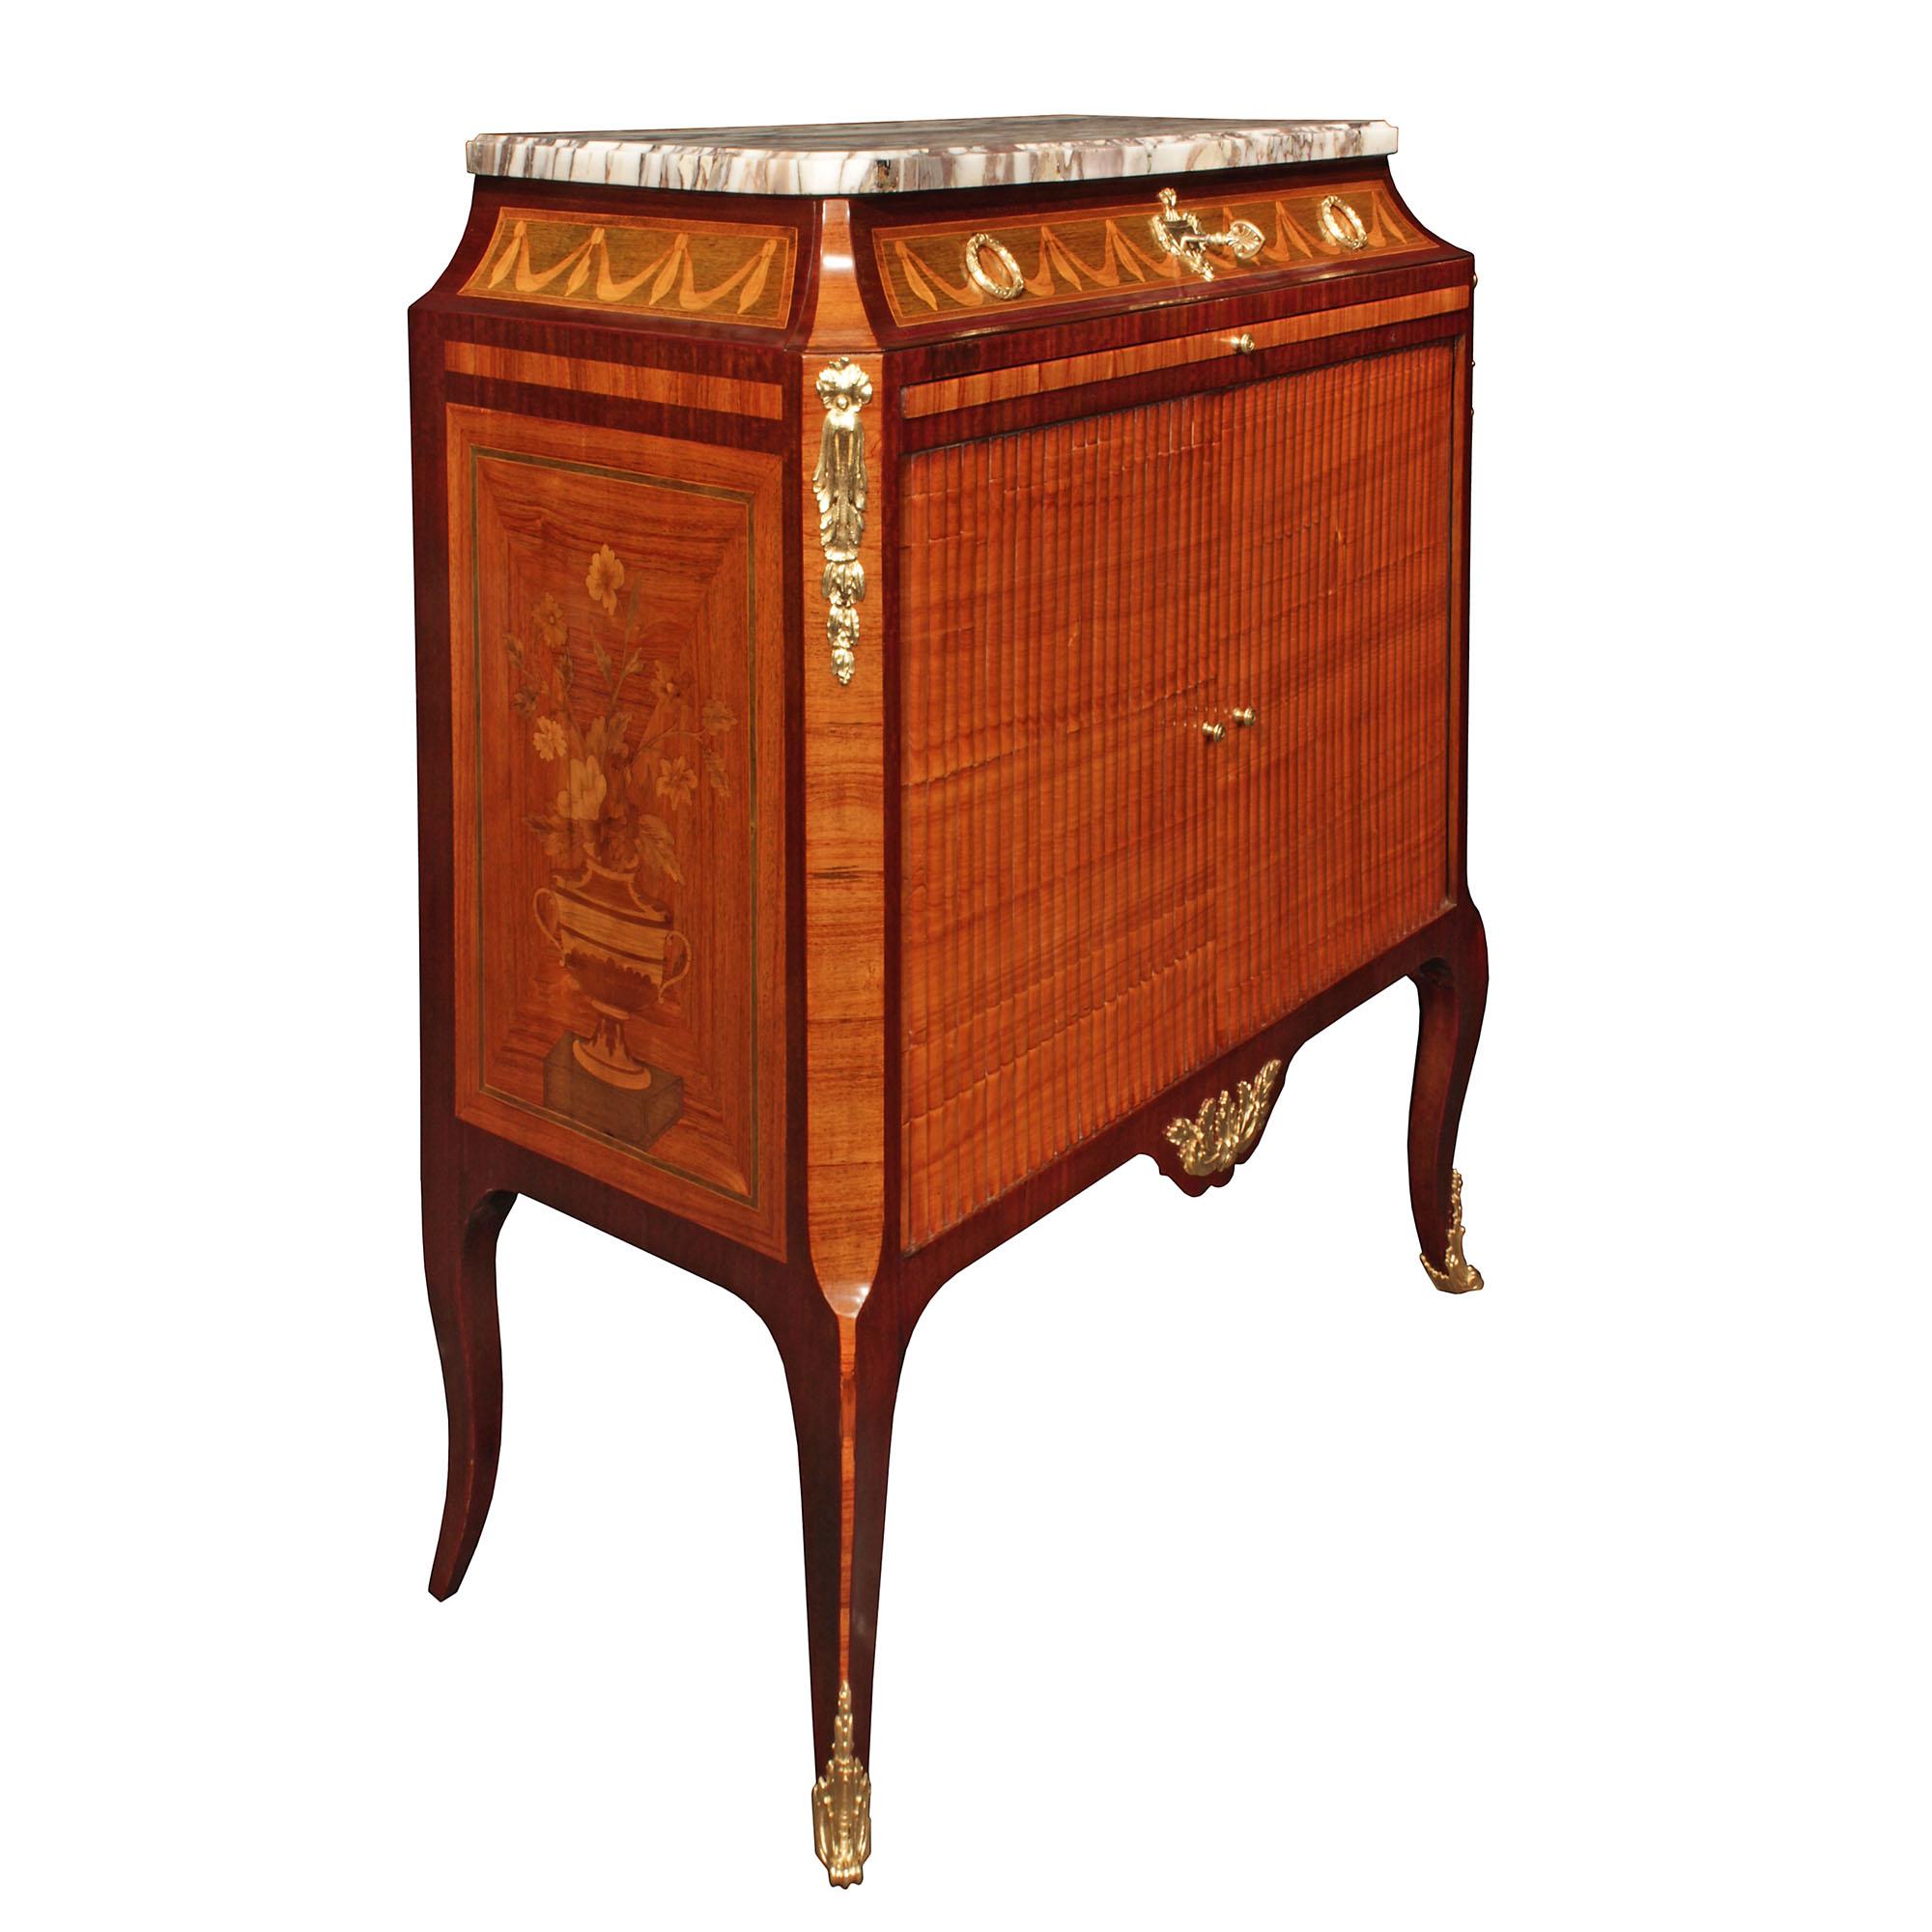 Kingwood French 19th Century Transitional St. Tulipwood Marquetry Cabinet For Sale